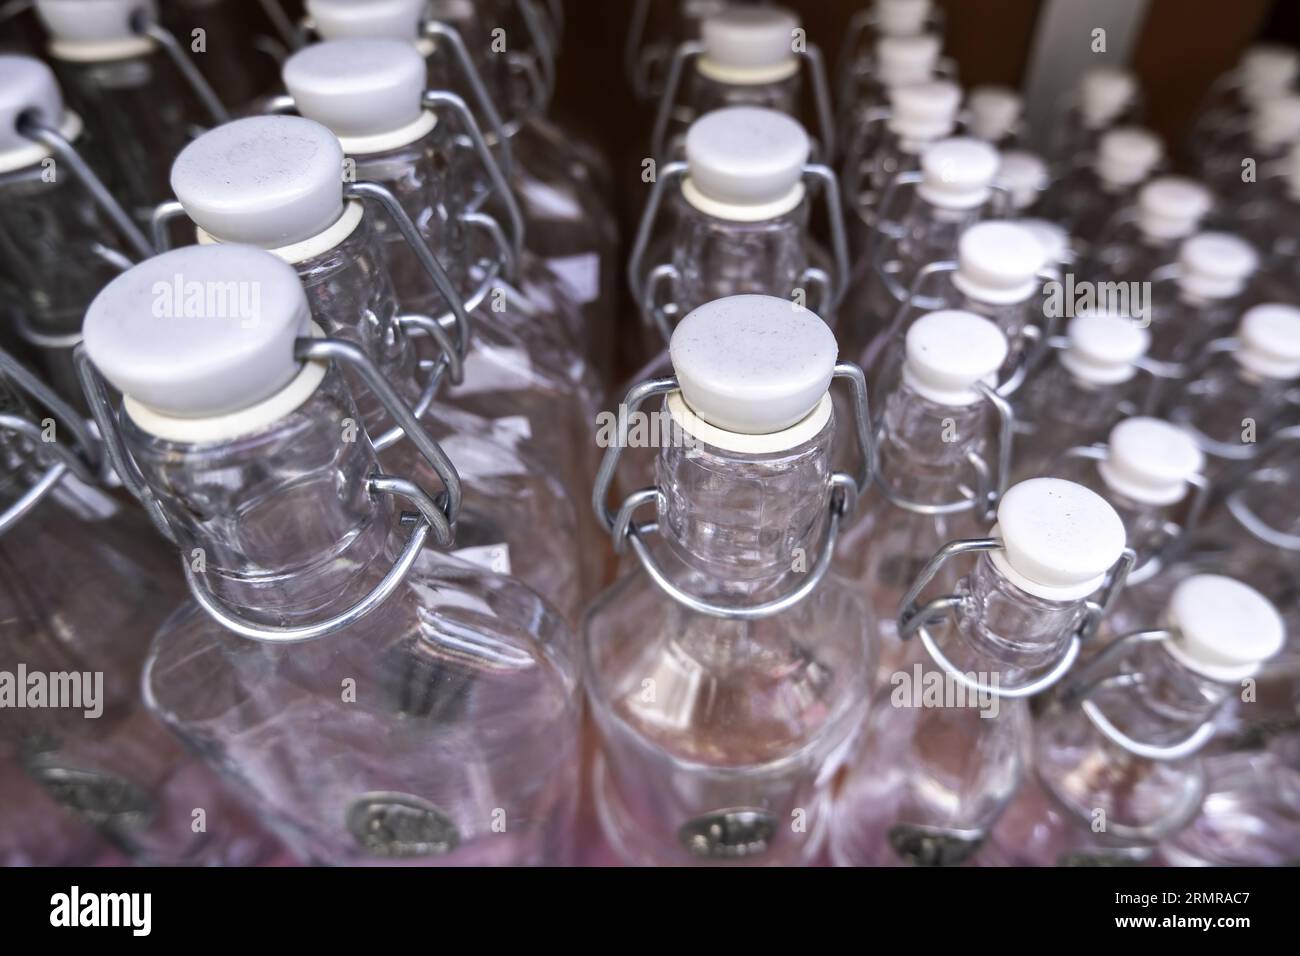 Detail of bottles to fill with blessed water, religious pilgrimage, belief and faith Stock Photo